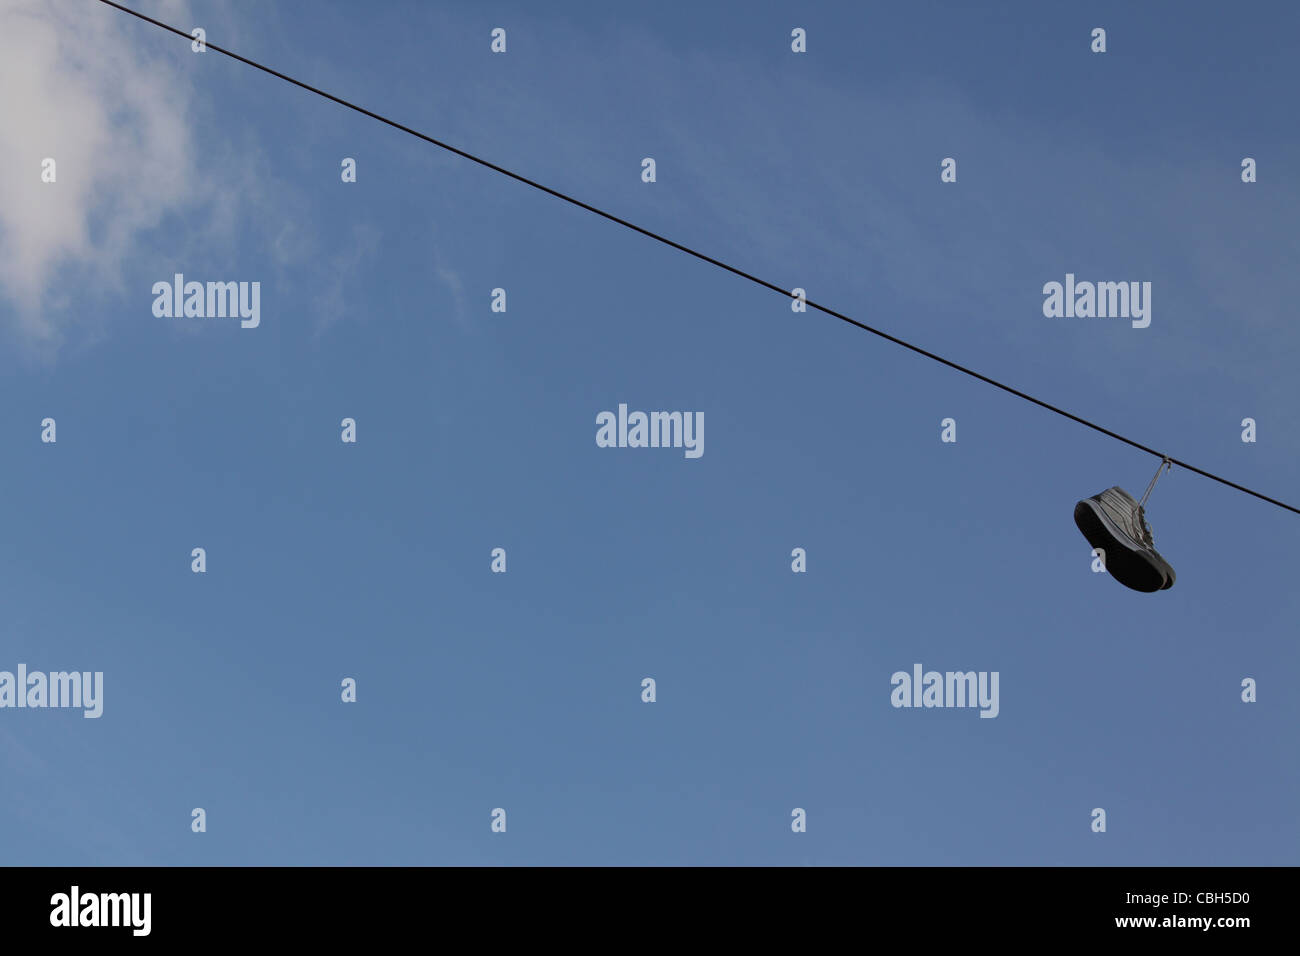 Shoefiti - sneakers dangling from overhead power lines, Greenpoint, Brooklyn, NY, USA Stock Photo